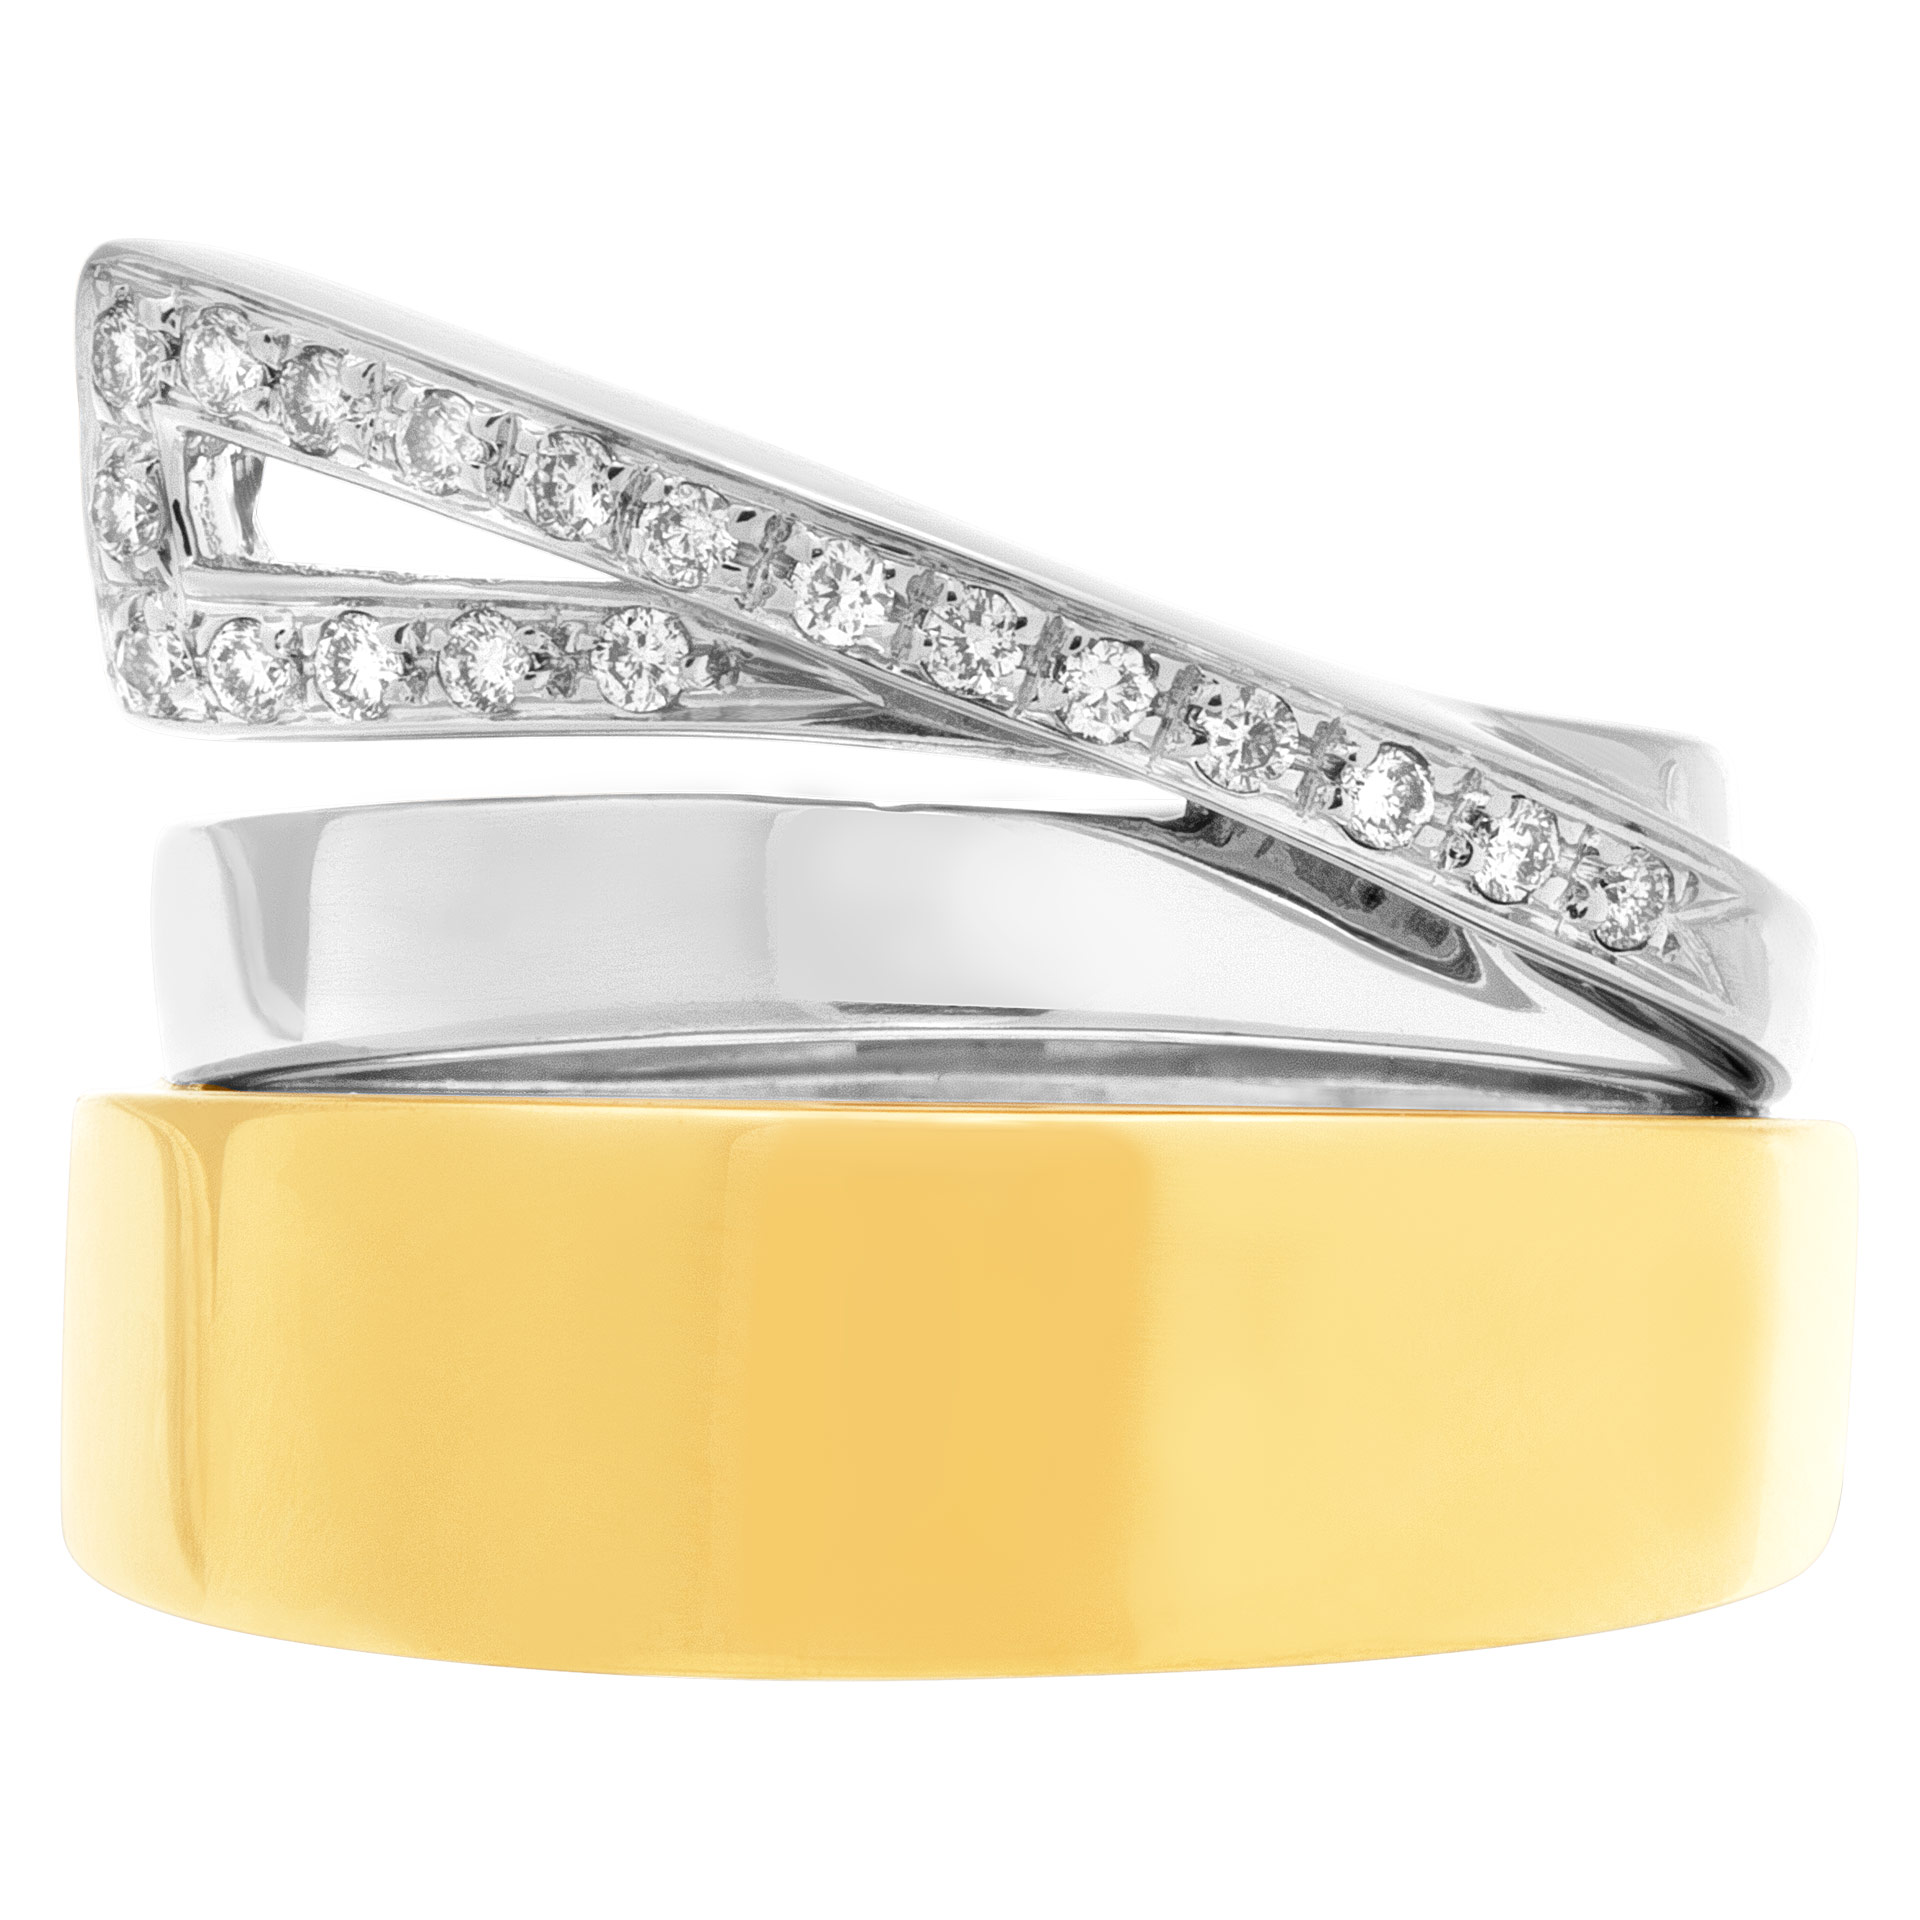  Stack ing in 18k white and yellow gold with diamond swirl